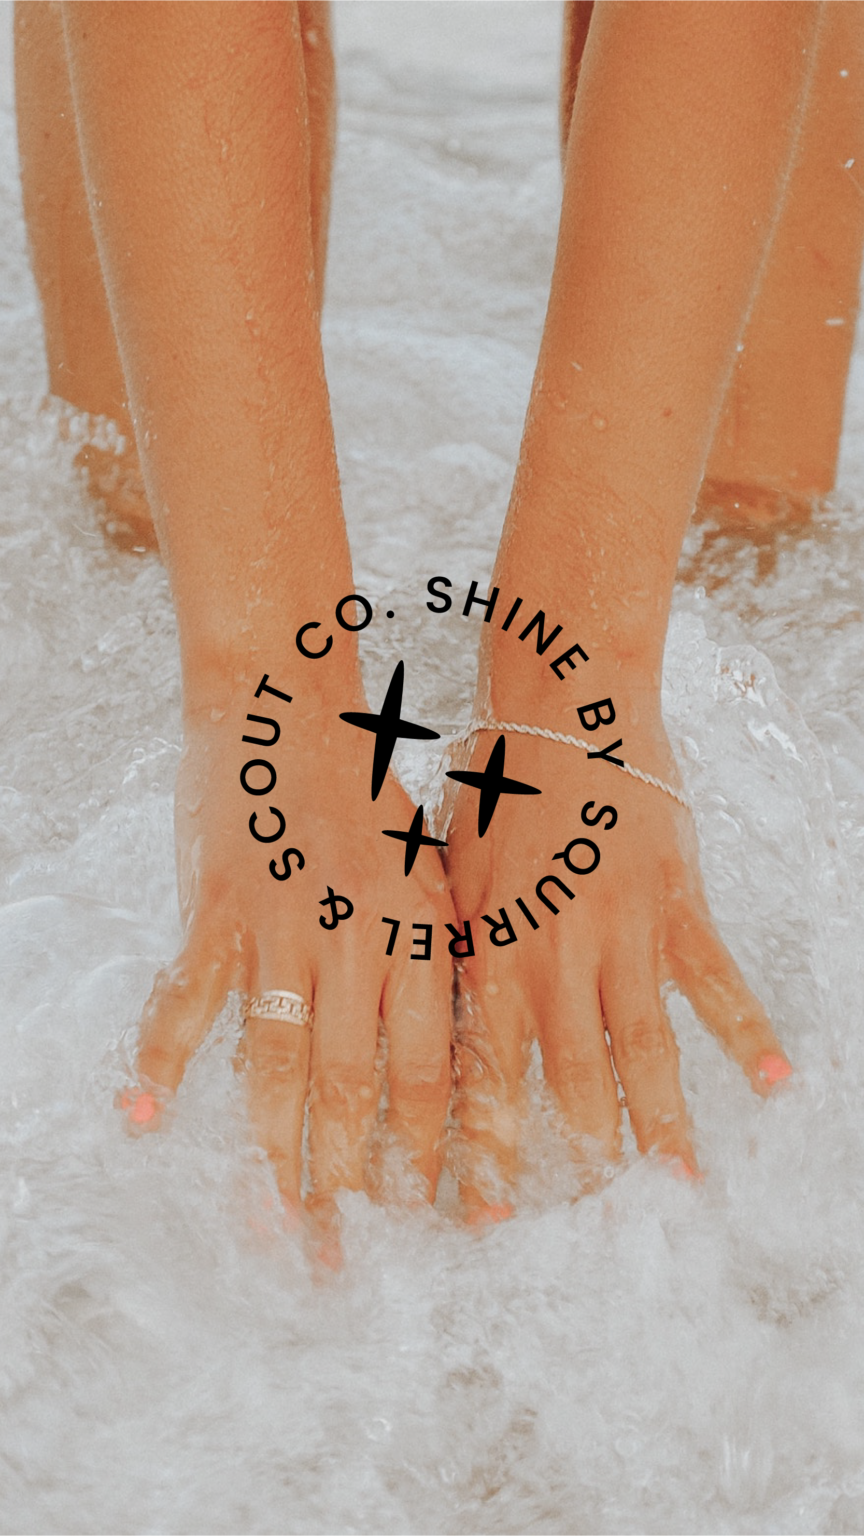 Brand Mark for Shine Permanent Jewelry by Absolute JEM